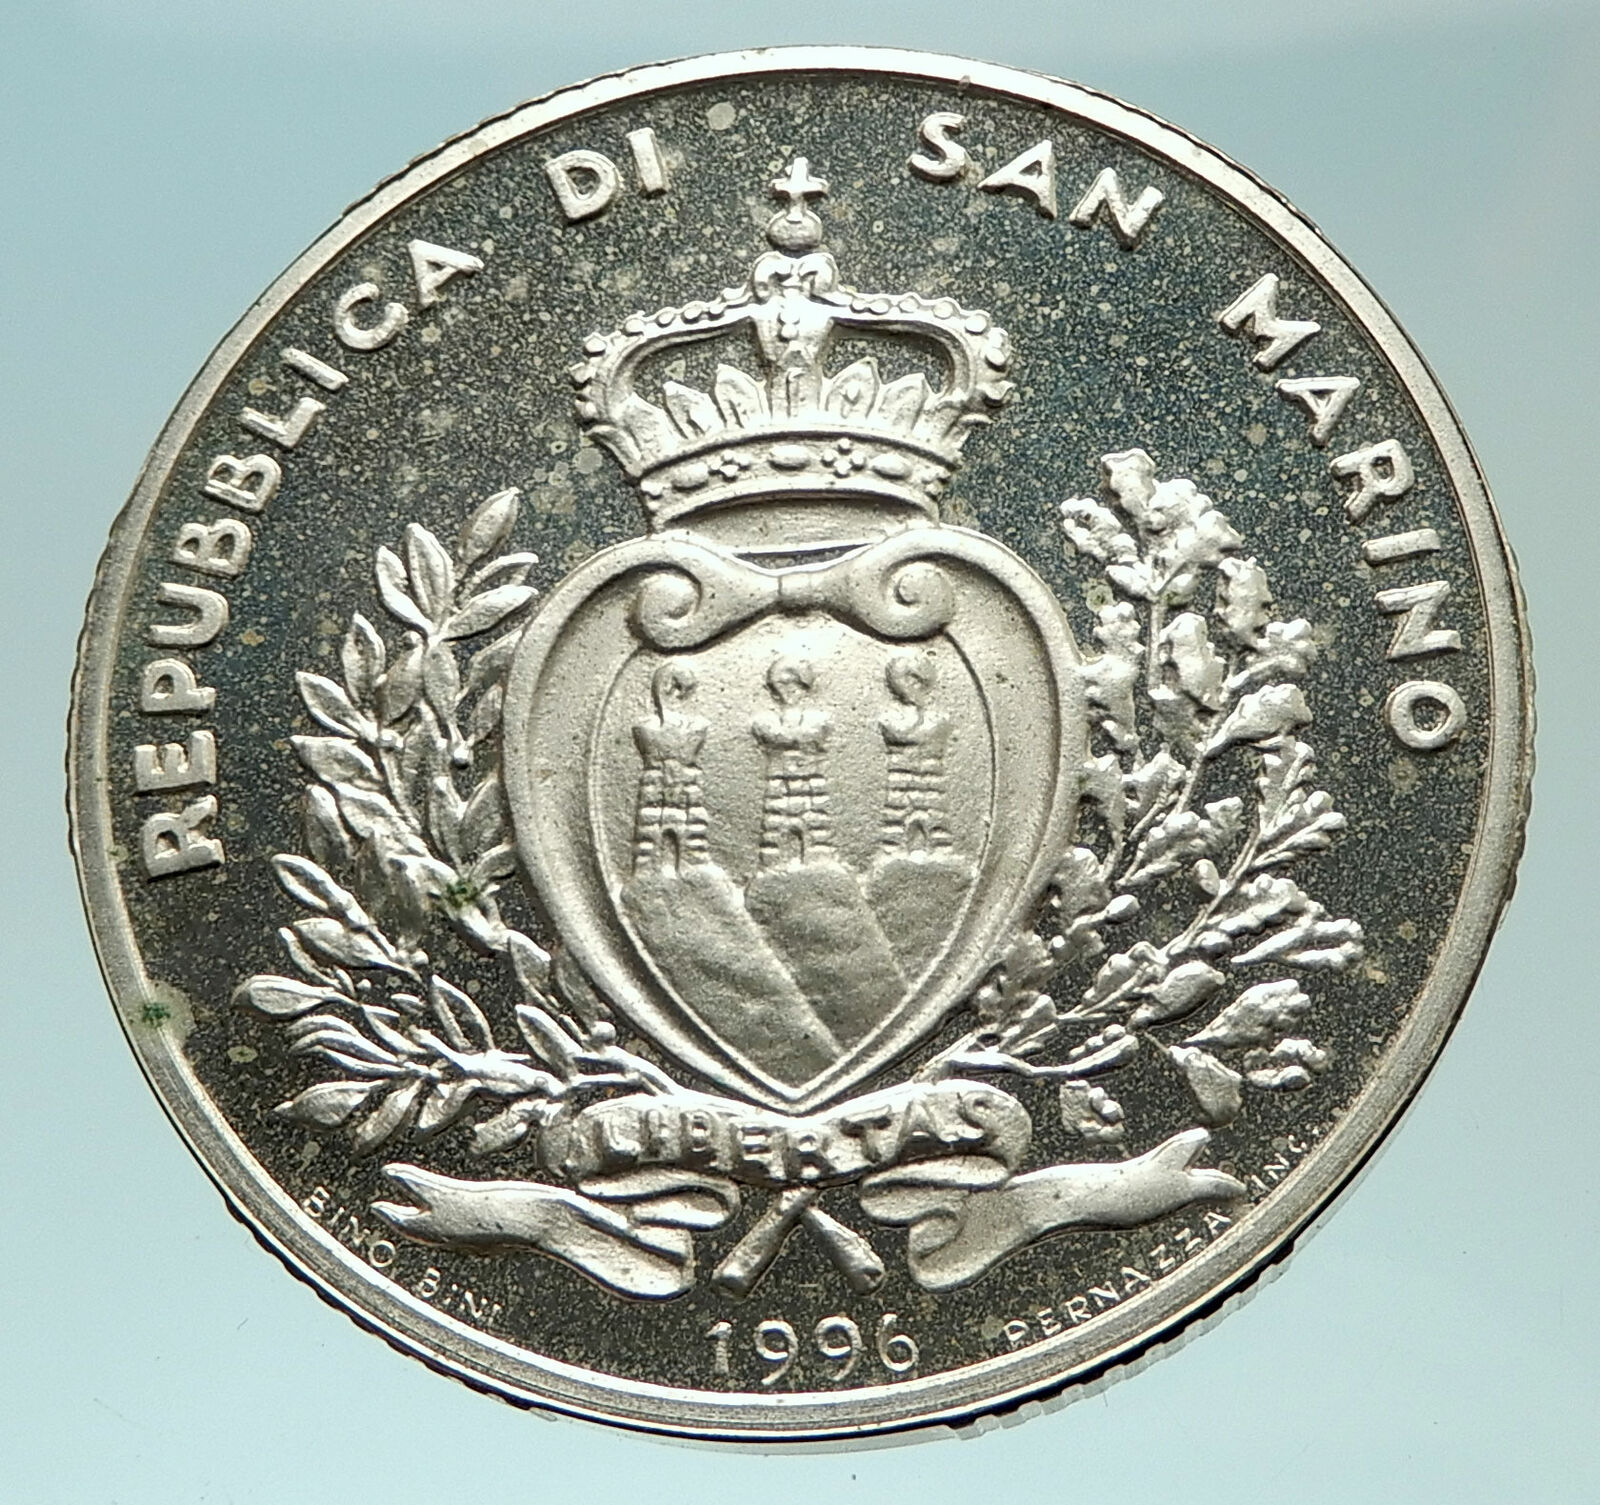 1996 SAN MARINO Italy with ENDANGERED Birds Silver Genuine 5000 Lire Coin i75926